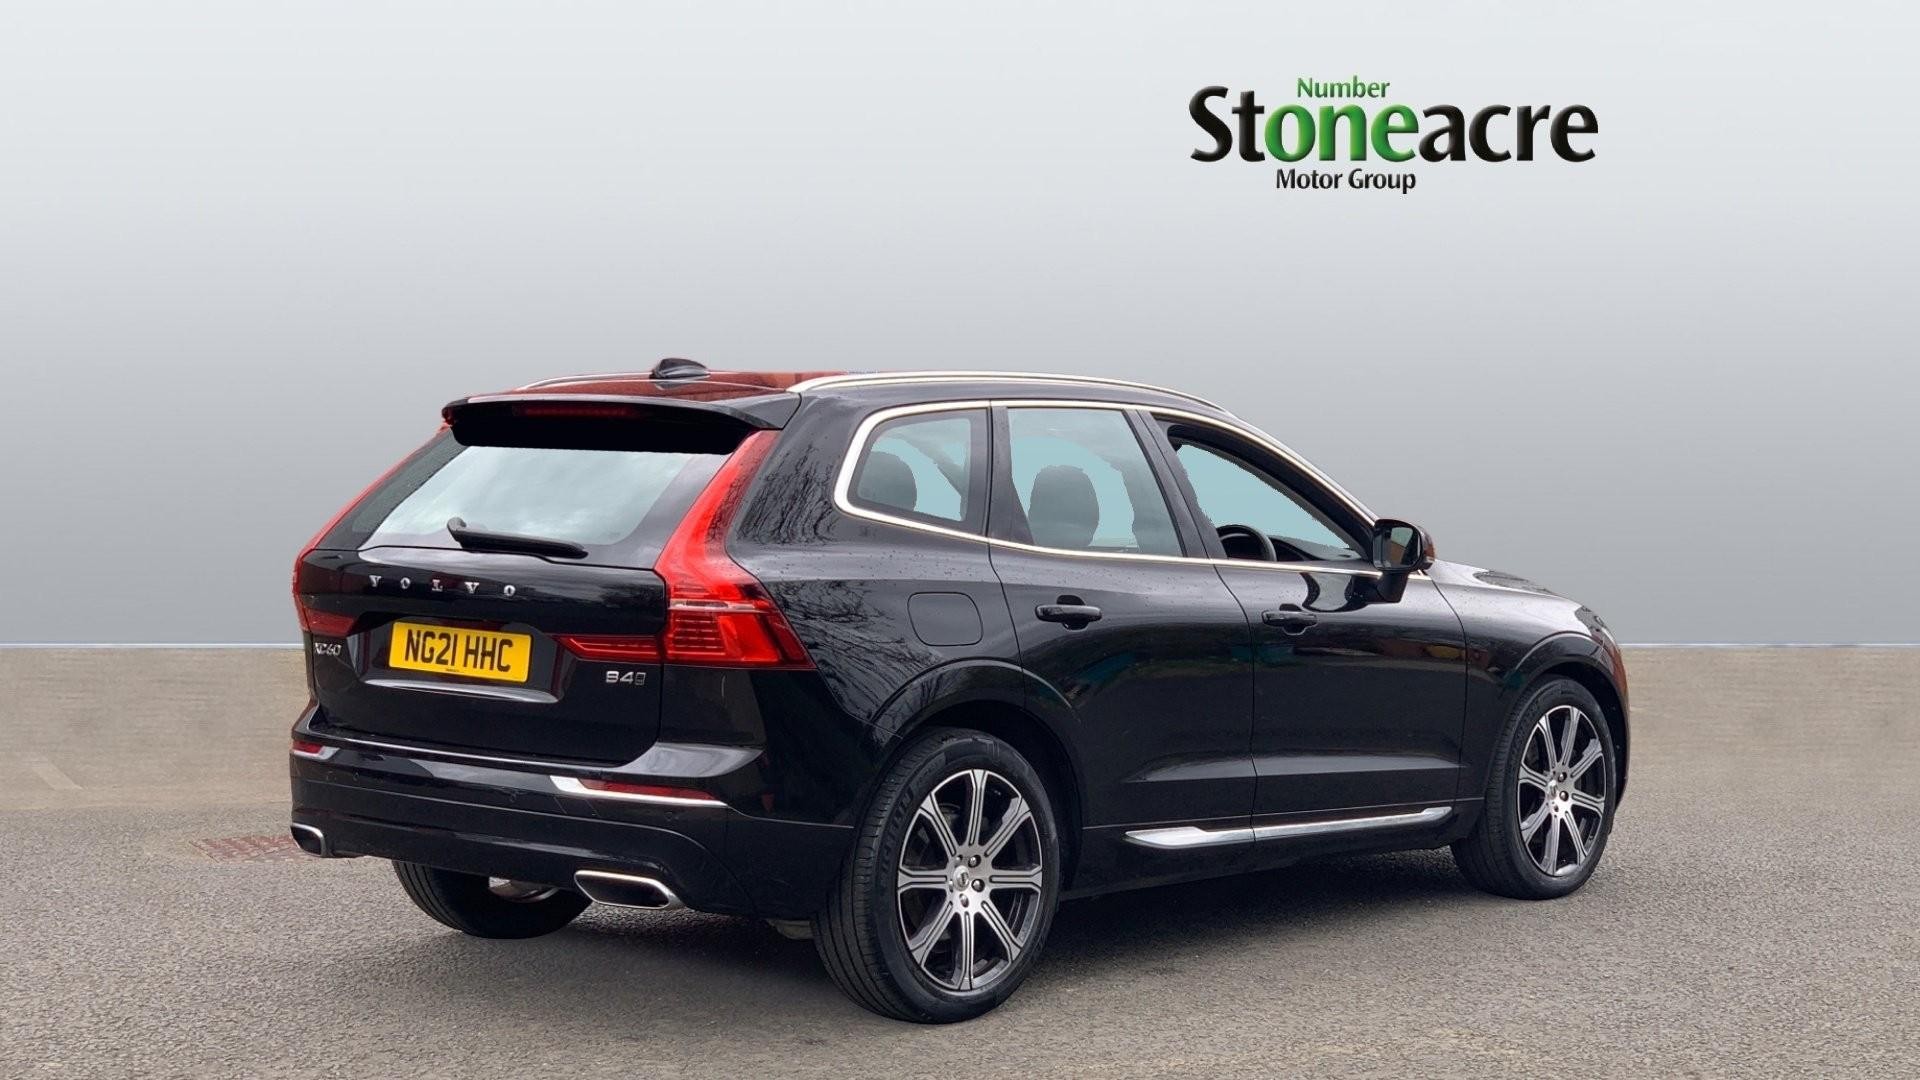 Volvo XC60 2.0 B4D Inscription Pro 5dr AWD Geartronic (NG21HHC) image 6